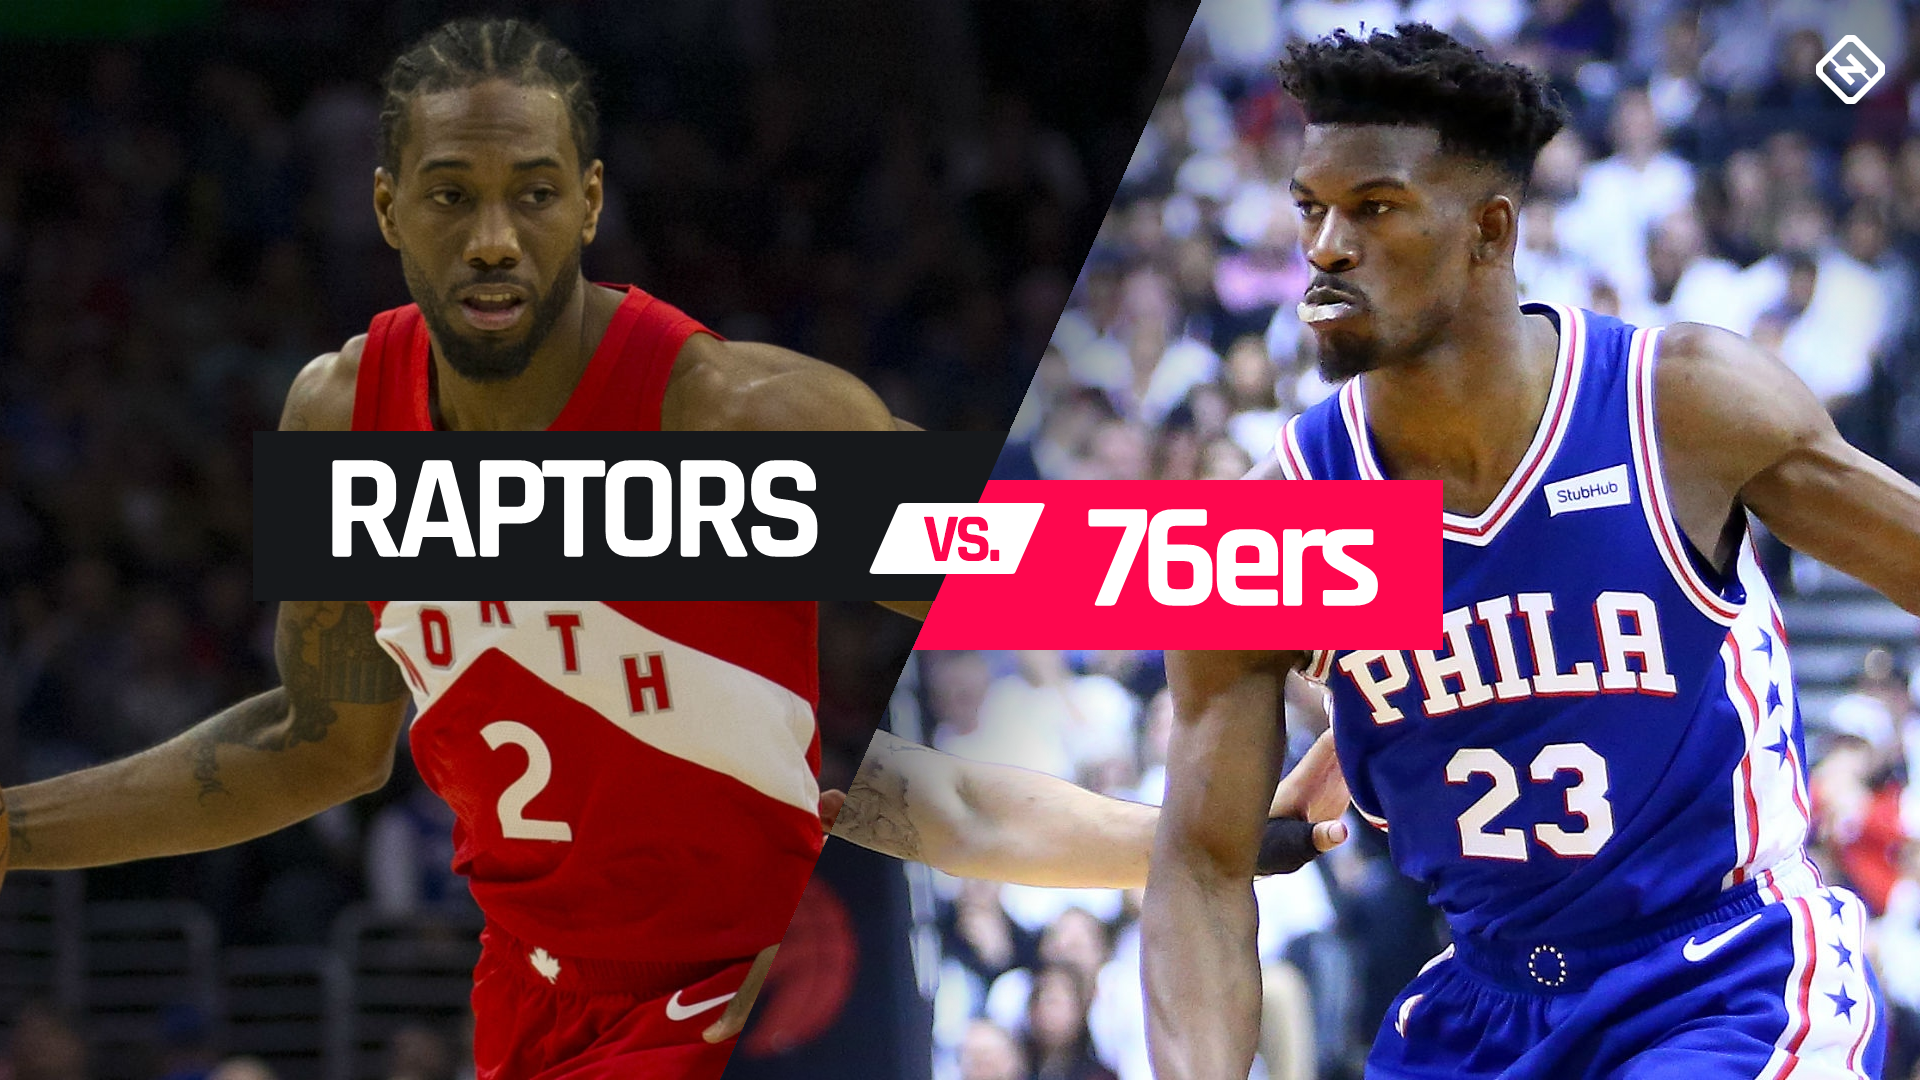 Raptors vs. 76ers Live score, Game 6 updates, highlights from 2019 NBA